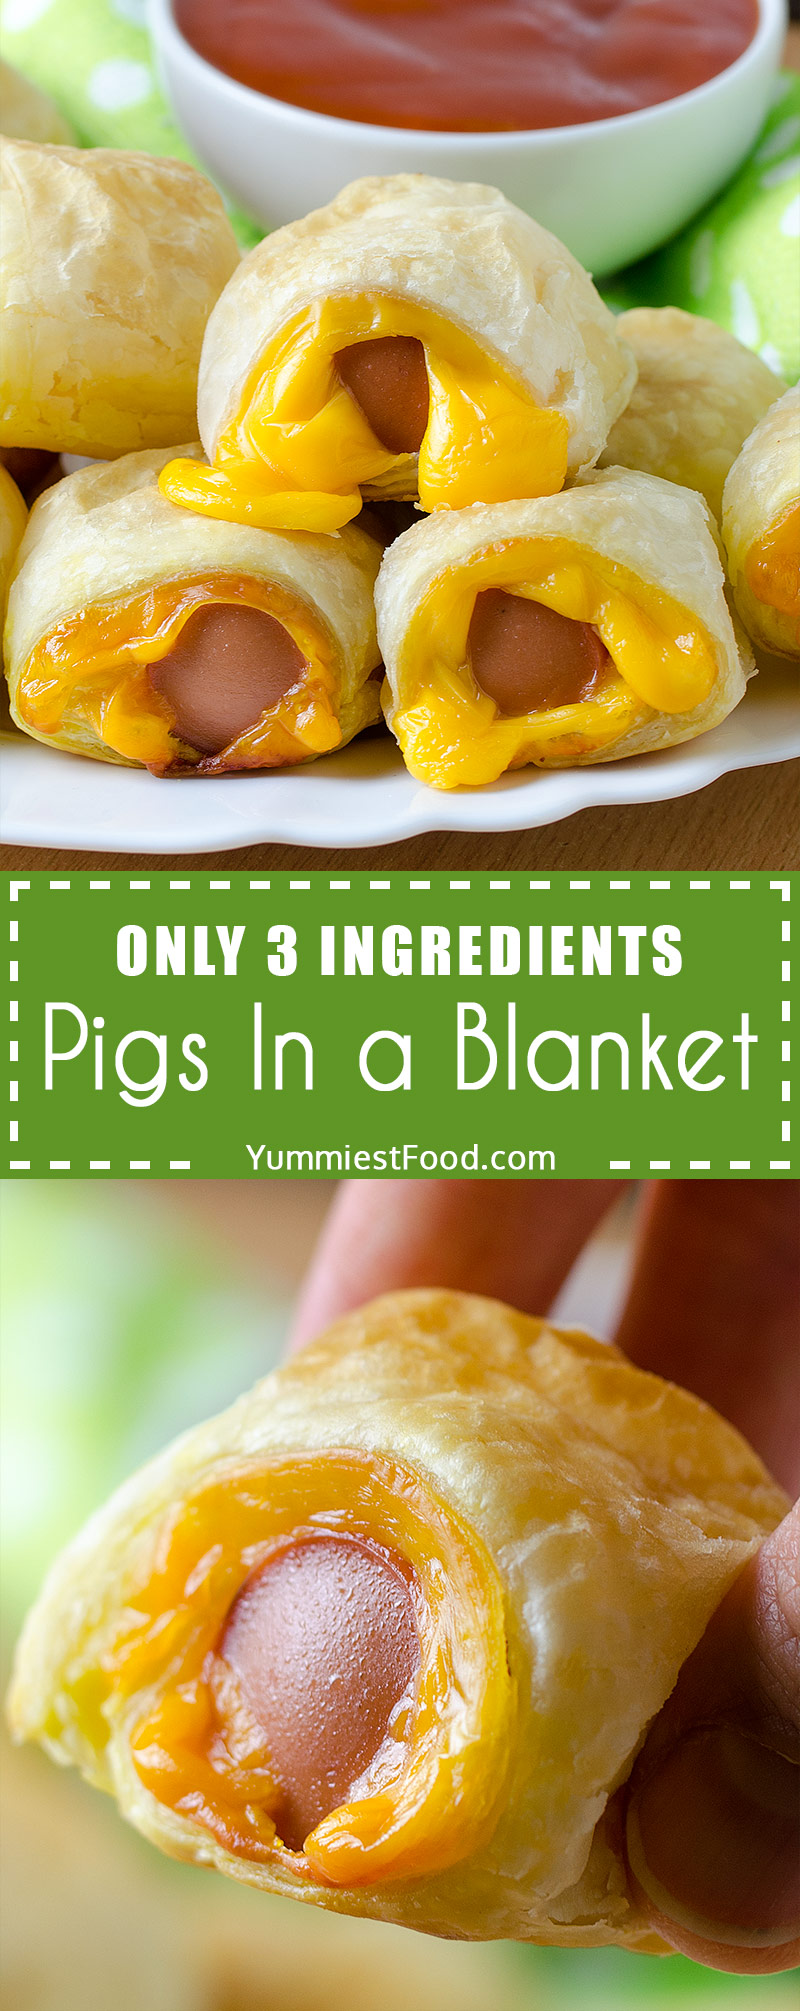 Easy Pigs In a Blanket with Hot Dogs Recipe from